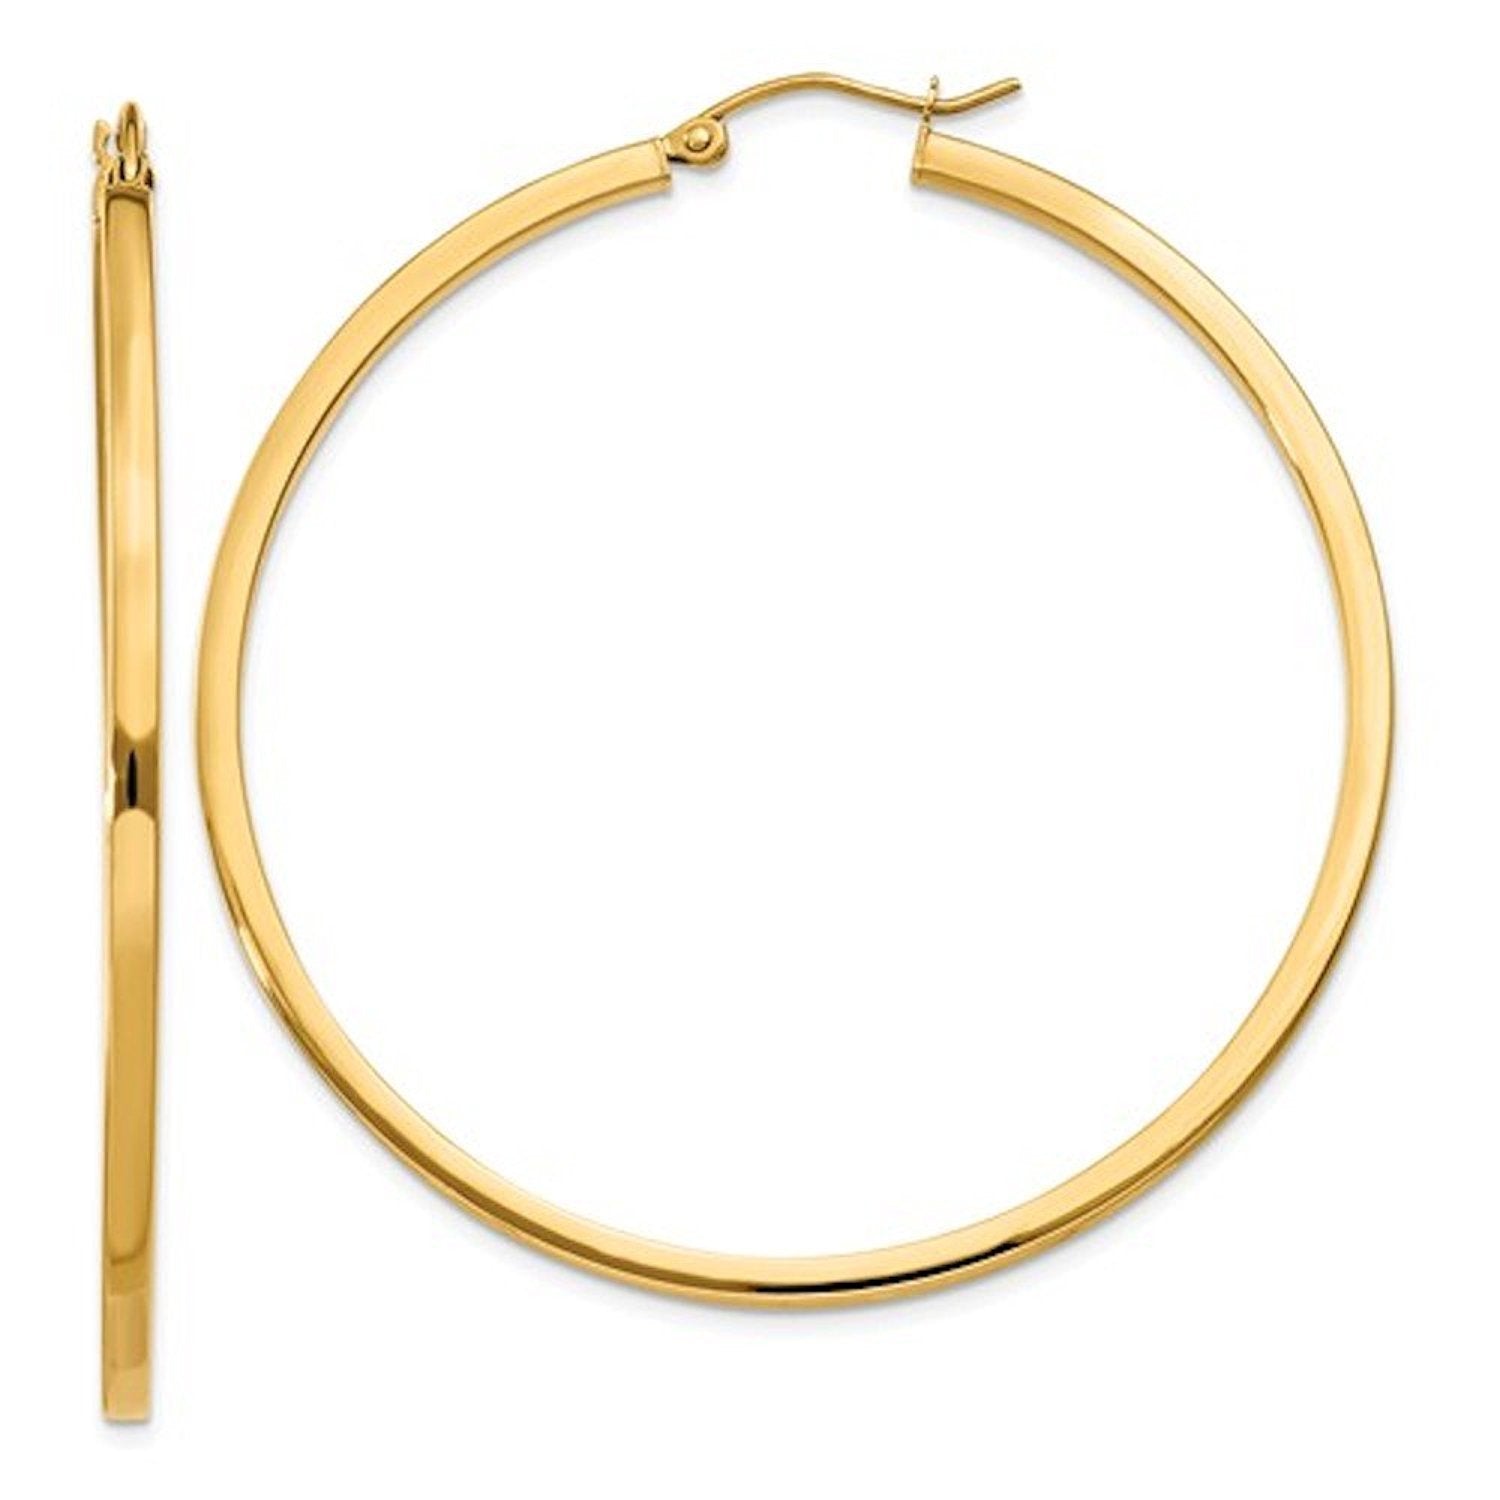 14k Yellow Gold Square Tube Round Hoop Earrings 50mm x 2mm